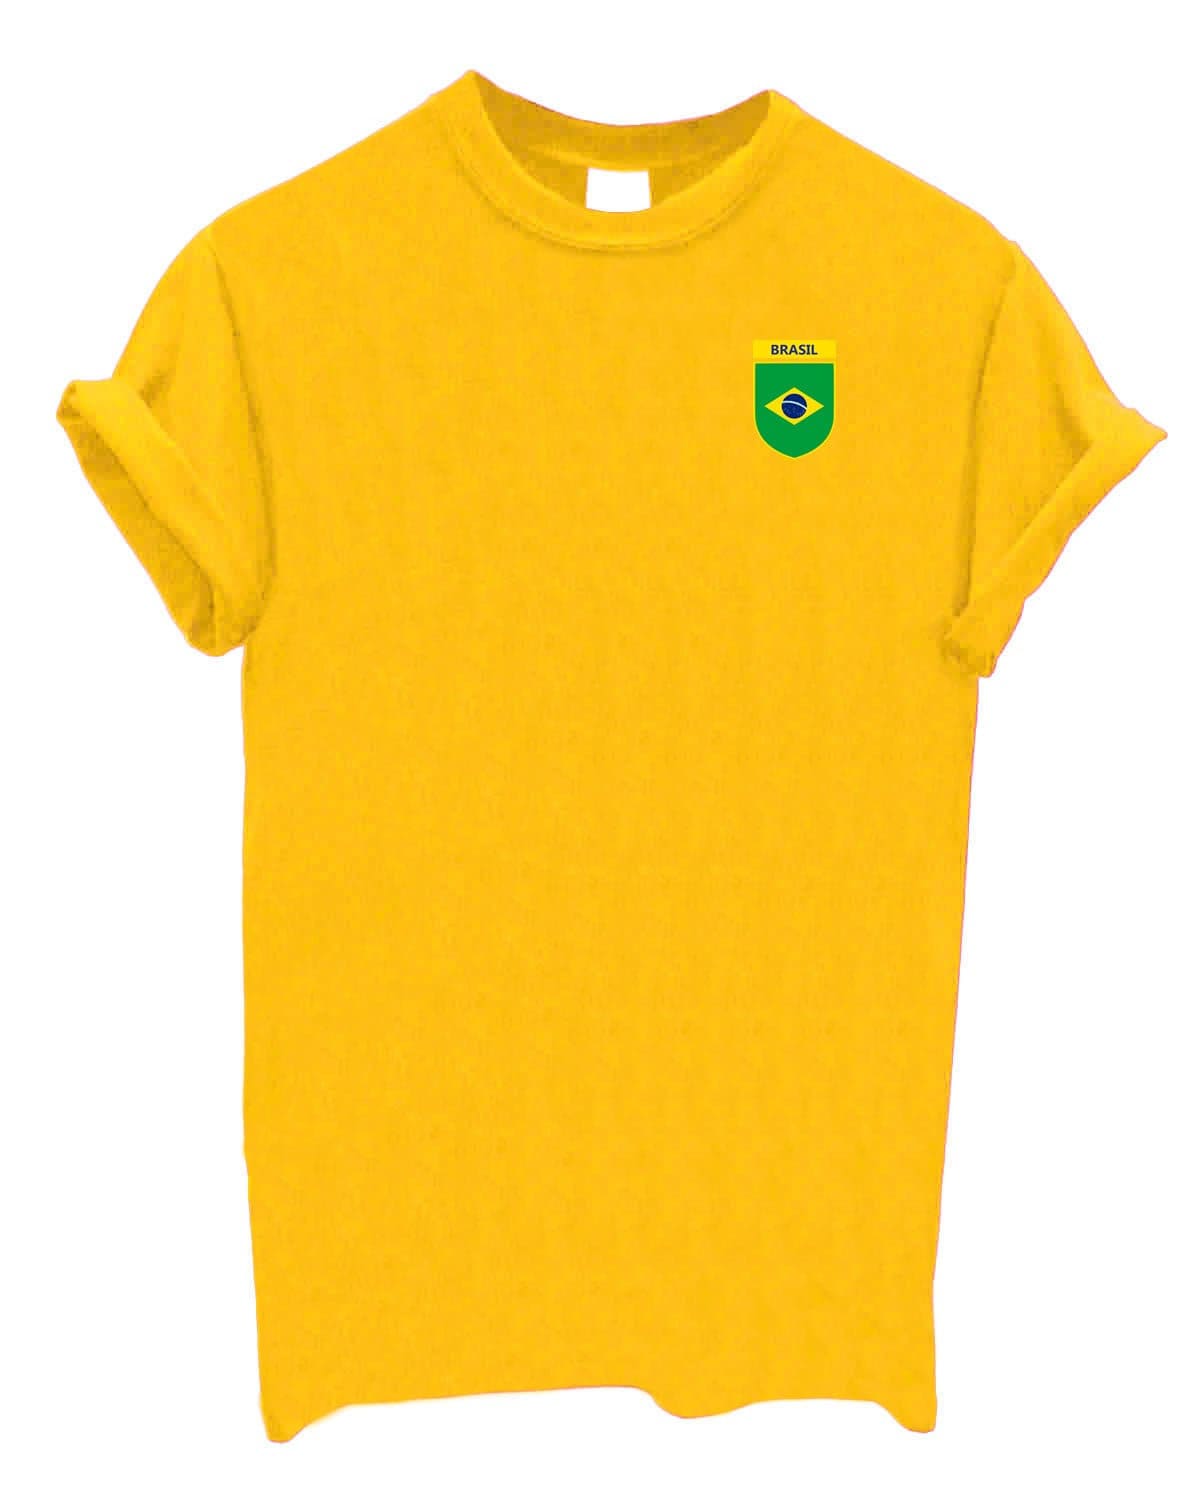 Brazil Team Crest Unisex Crew neck Tshirt Support your Country Brazilian football rugby cricket GB